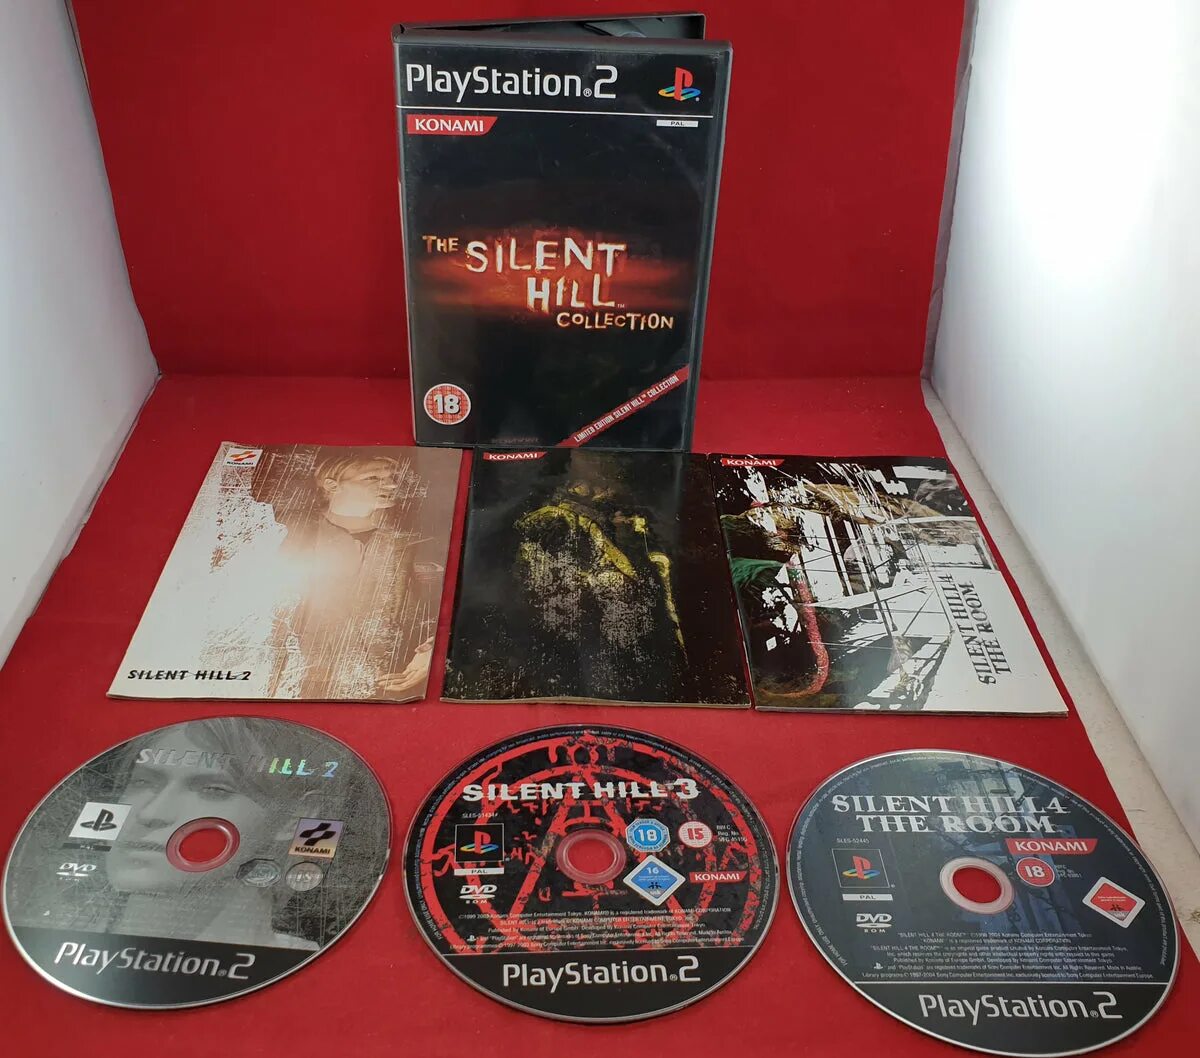 Silent Hill ps2 диск. PLAYSTATION 2 Disk Silent Hill.